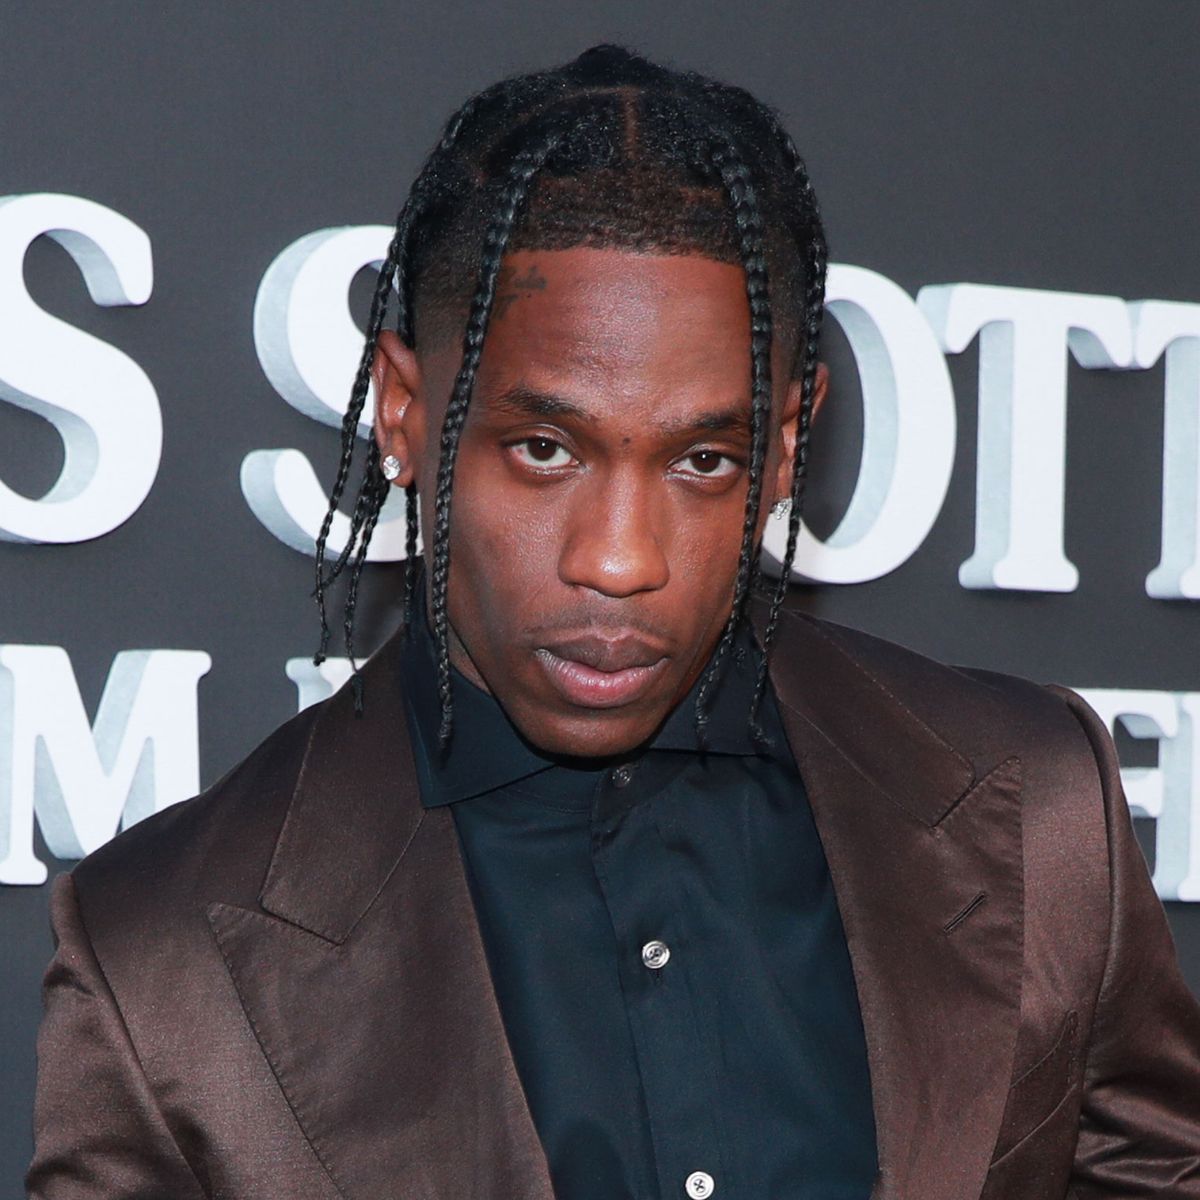 Breaking news rapper Travis Scott was found shot with tons of blood he had bruises all over him witnesses say he got into an argument with somebody and they didn’t pulled out a pistol